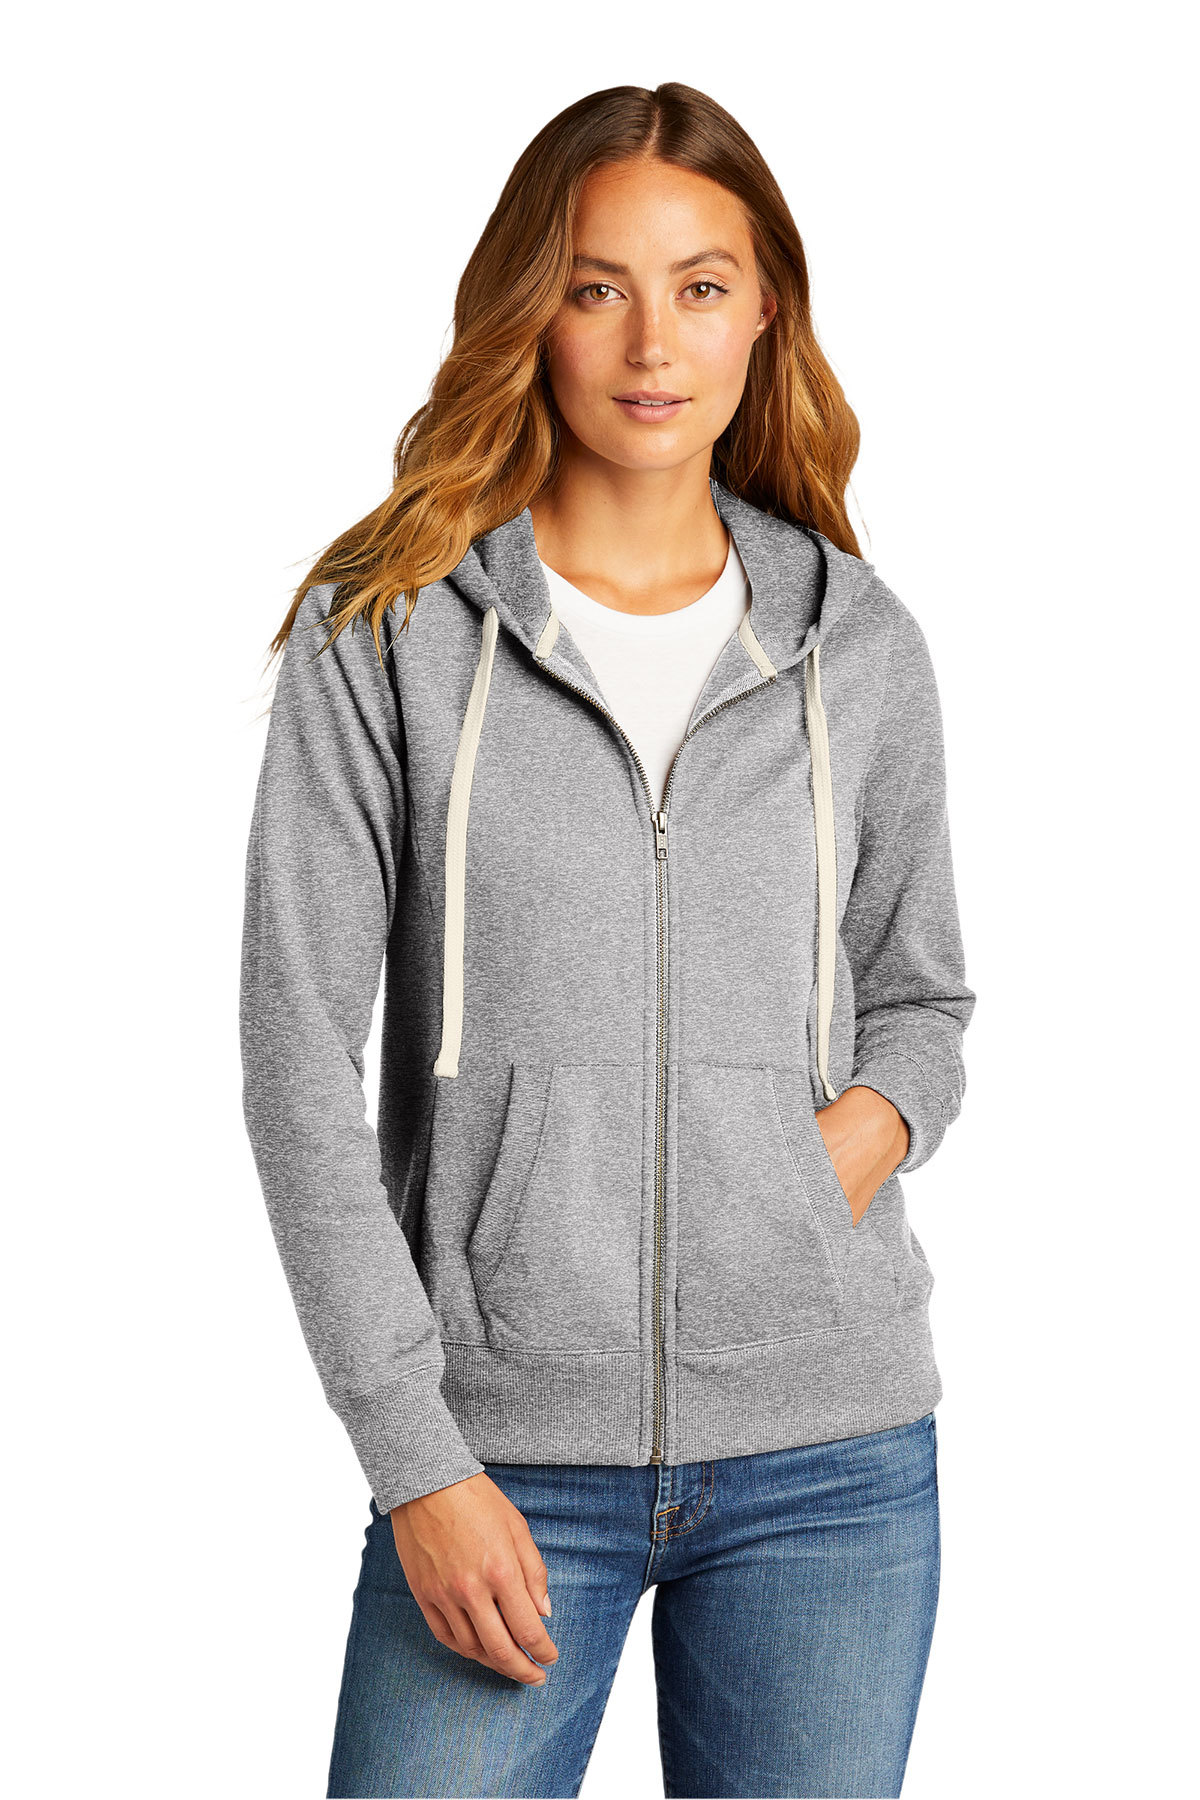 Women's zip hoodie are versatile and comfortable wardrobe staples that can be effortlessly styled for various occasions,